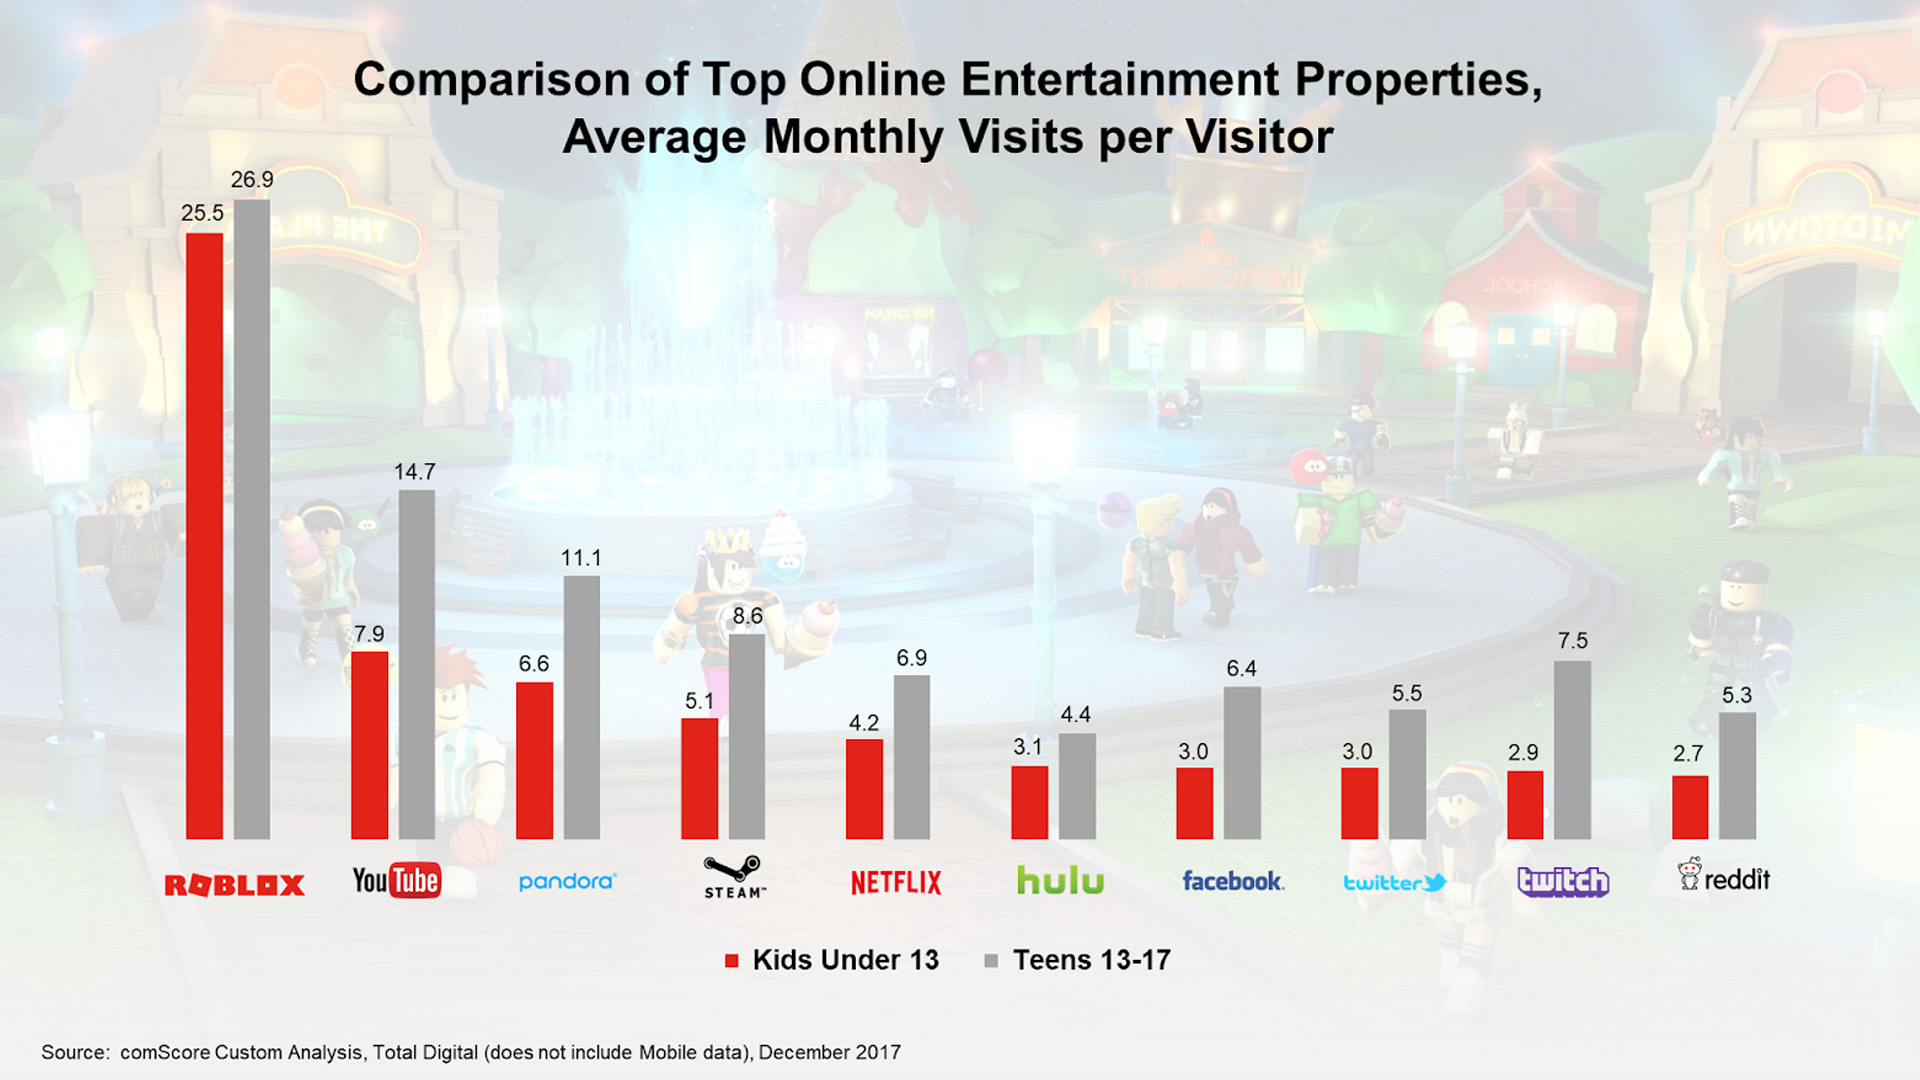 Roblox Emerges As A Top Online Entertainment Platform For Kids And